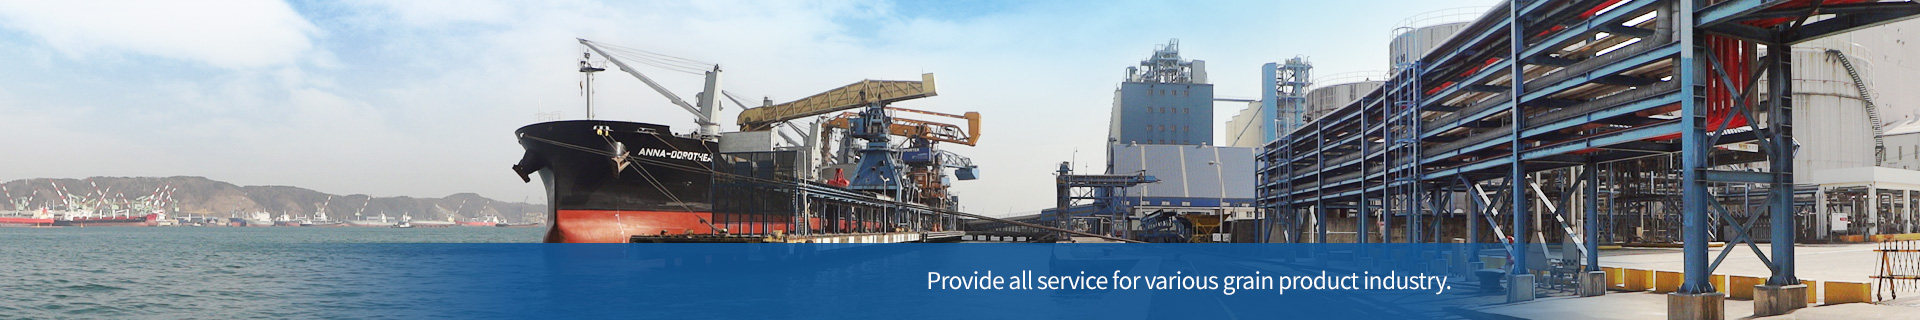 Provide all service for various grain product industry.